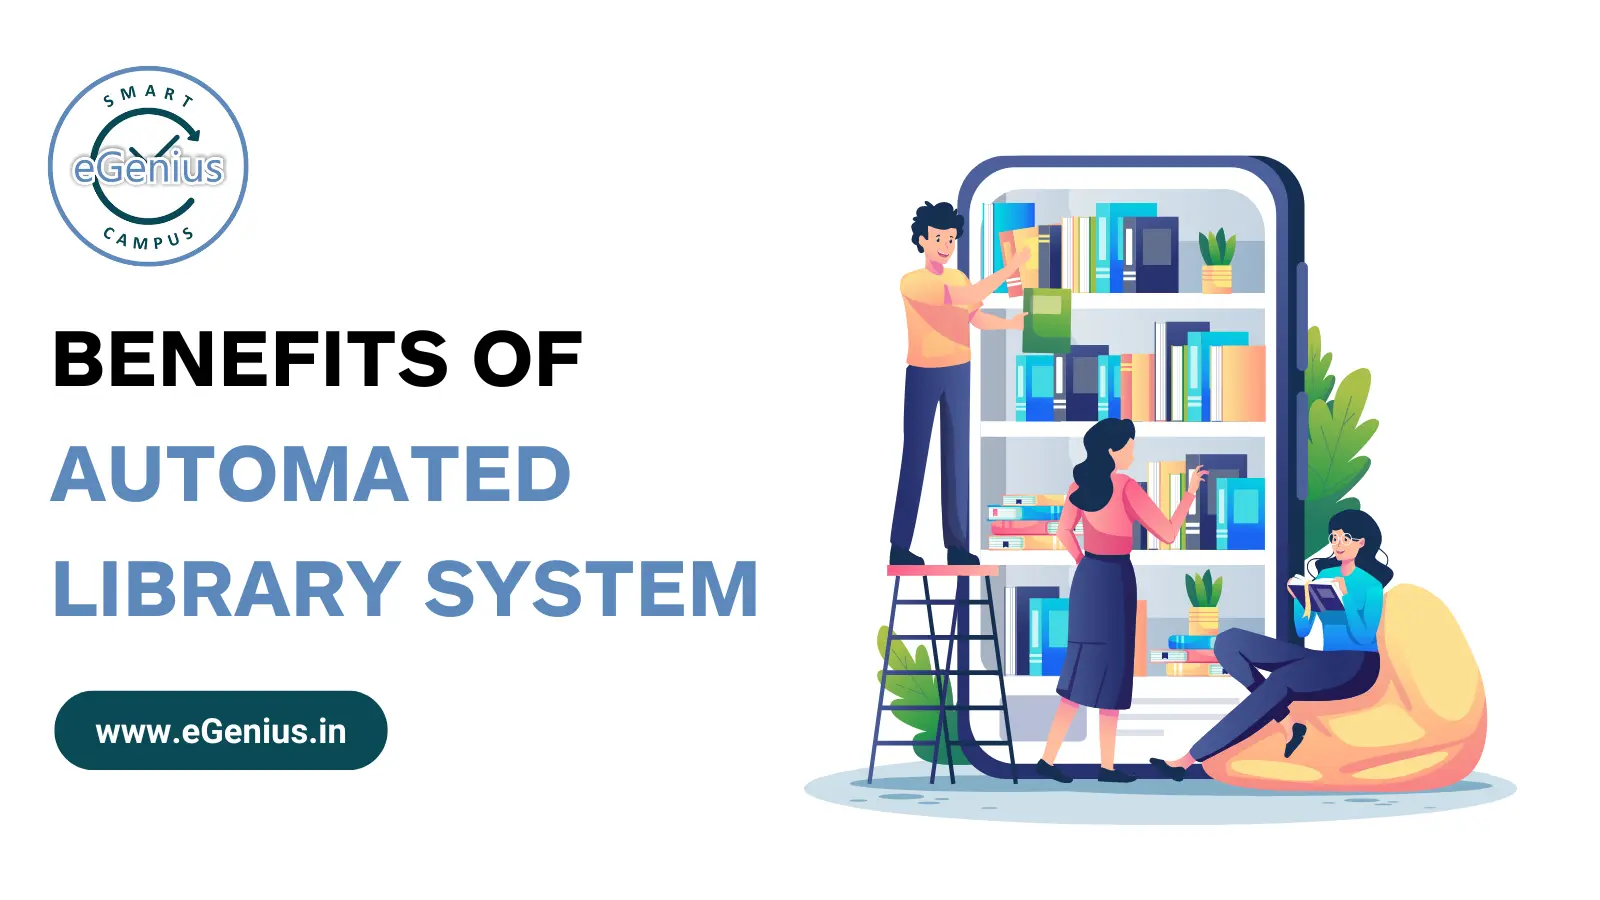 Benefits of Automated Library System